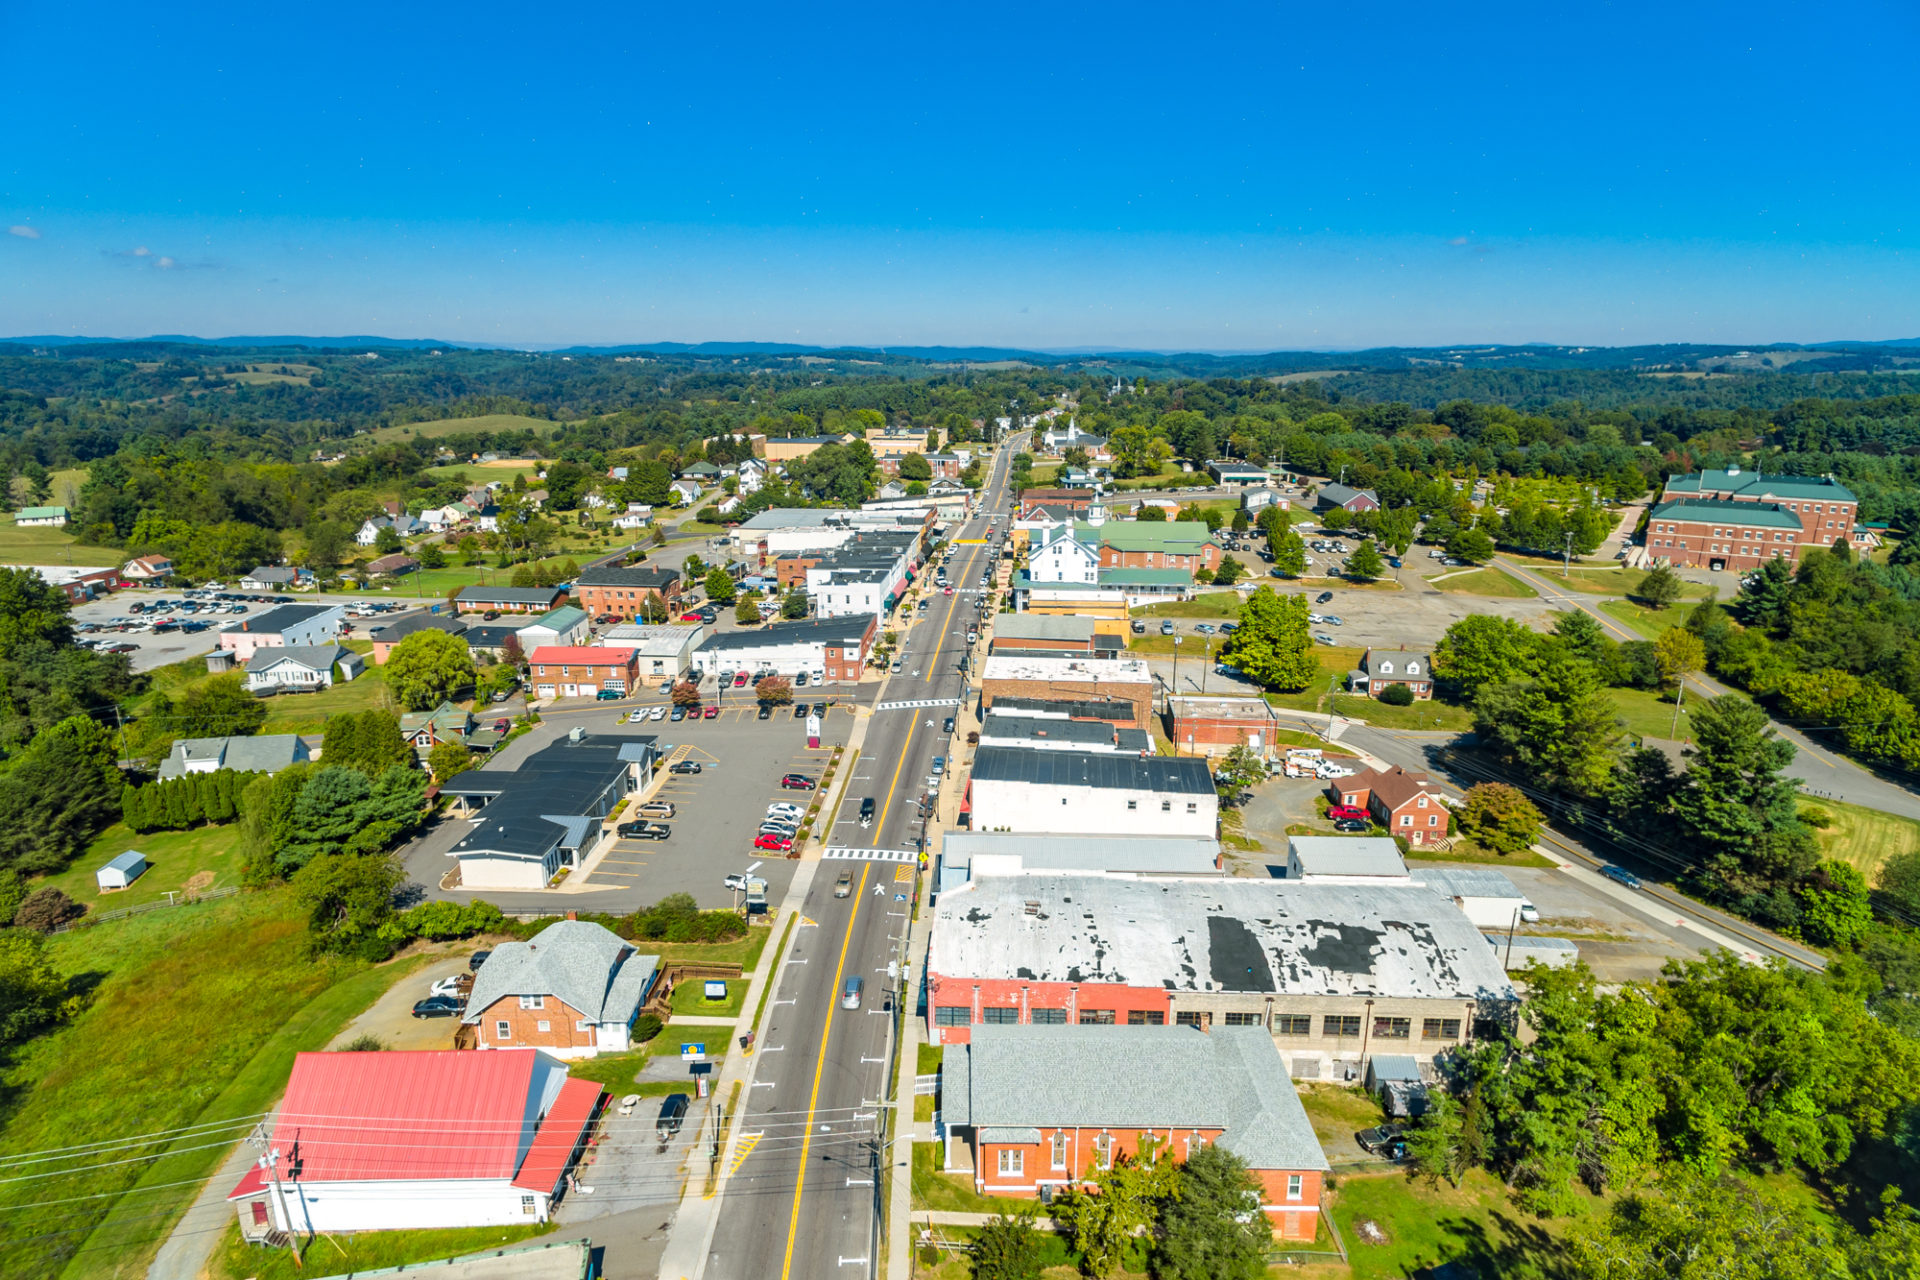 Downtown Hillsville Berkshire Hathaway HomeServices Mountain Sky